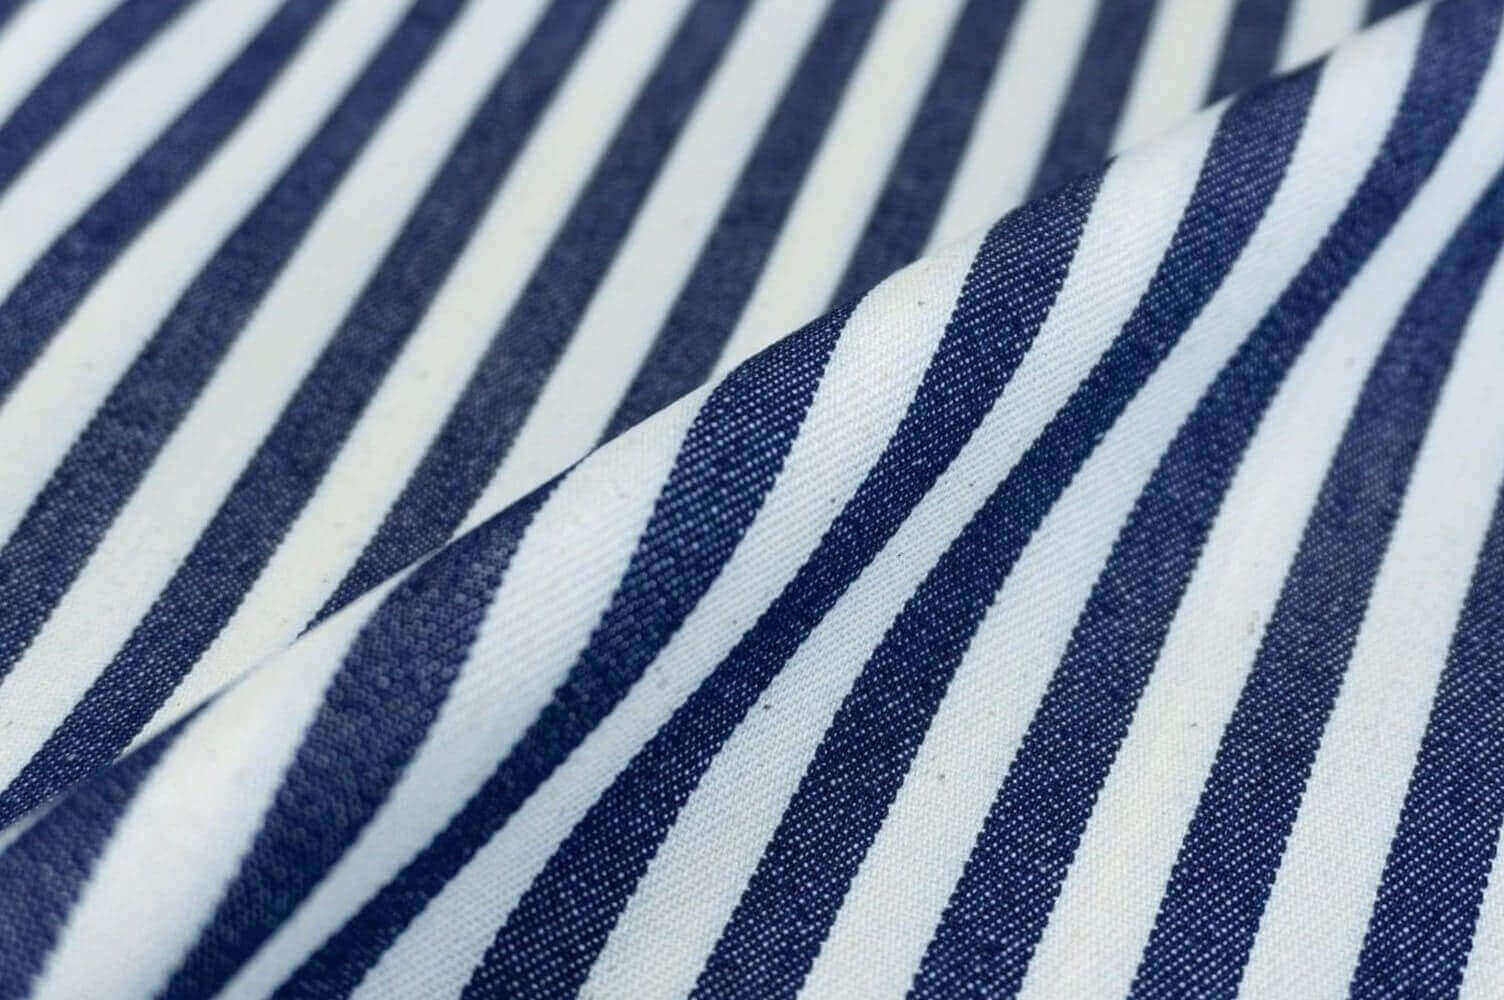 Buy and Current Sale Price of striped shirting fabric - Arad Branding